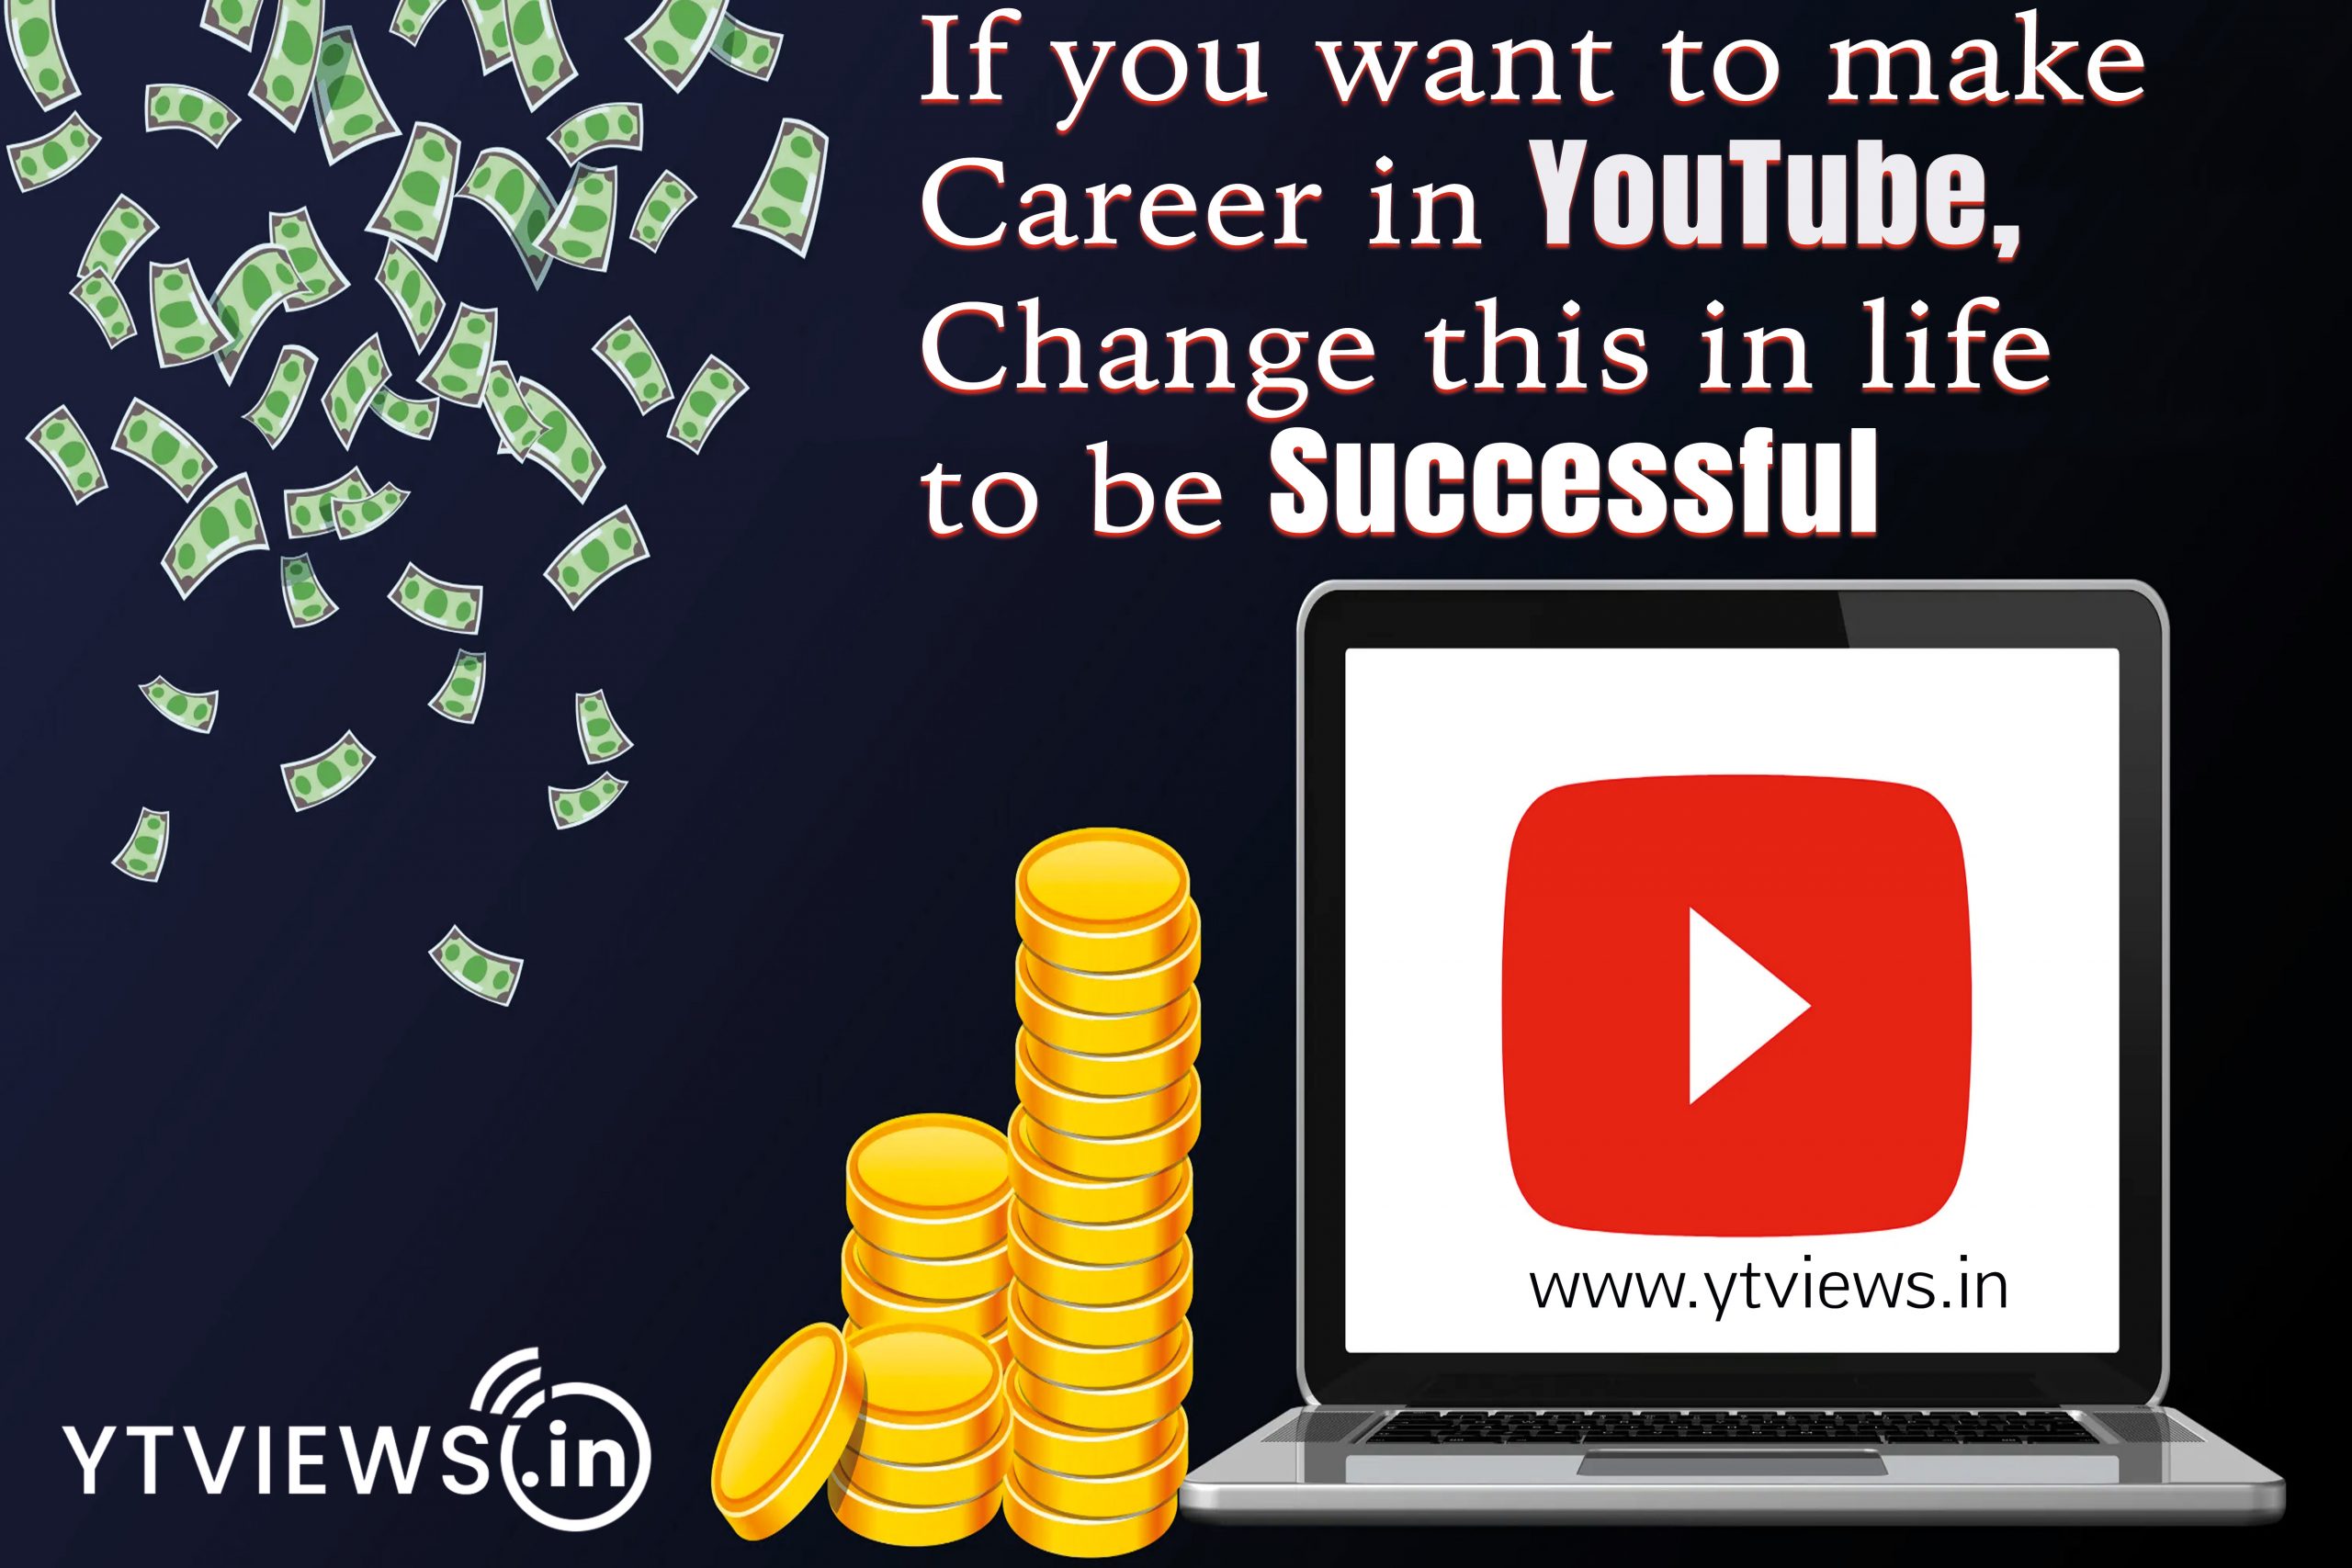 If you want to make your career in Youtube, change this in your life to be successful.